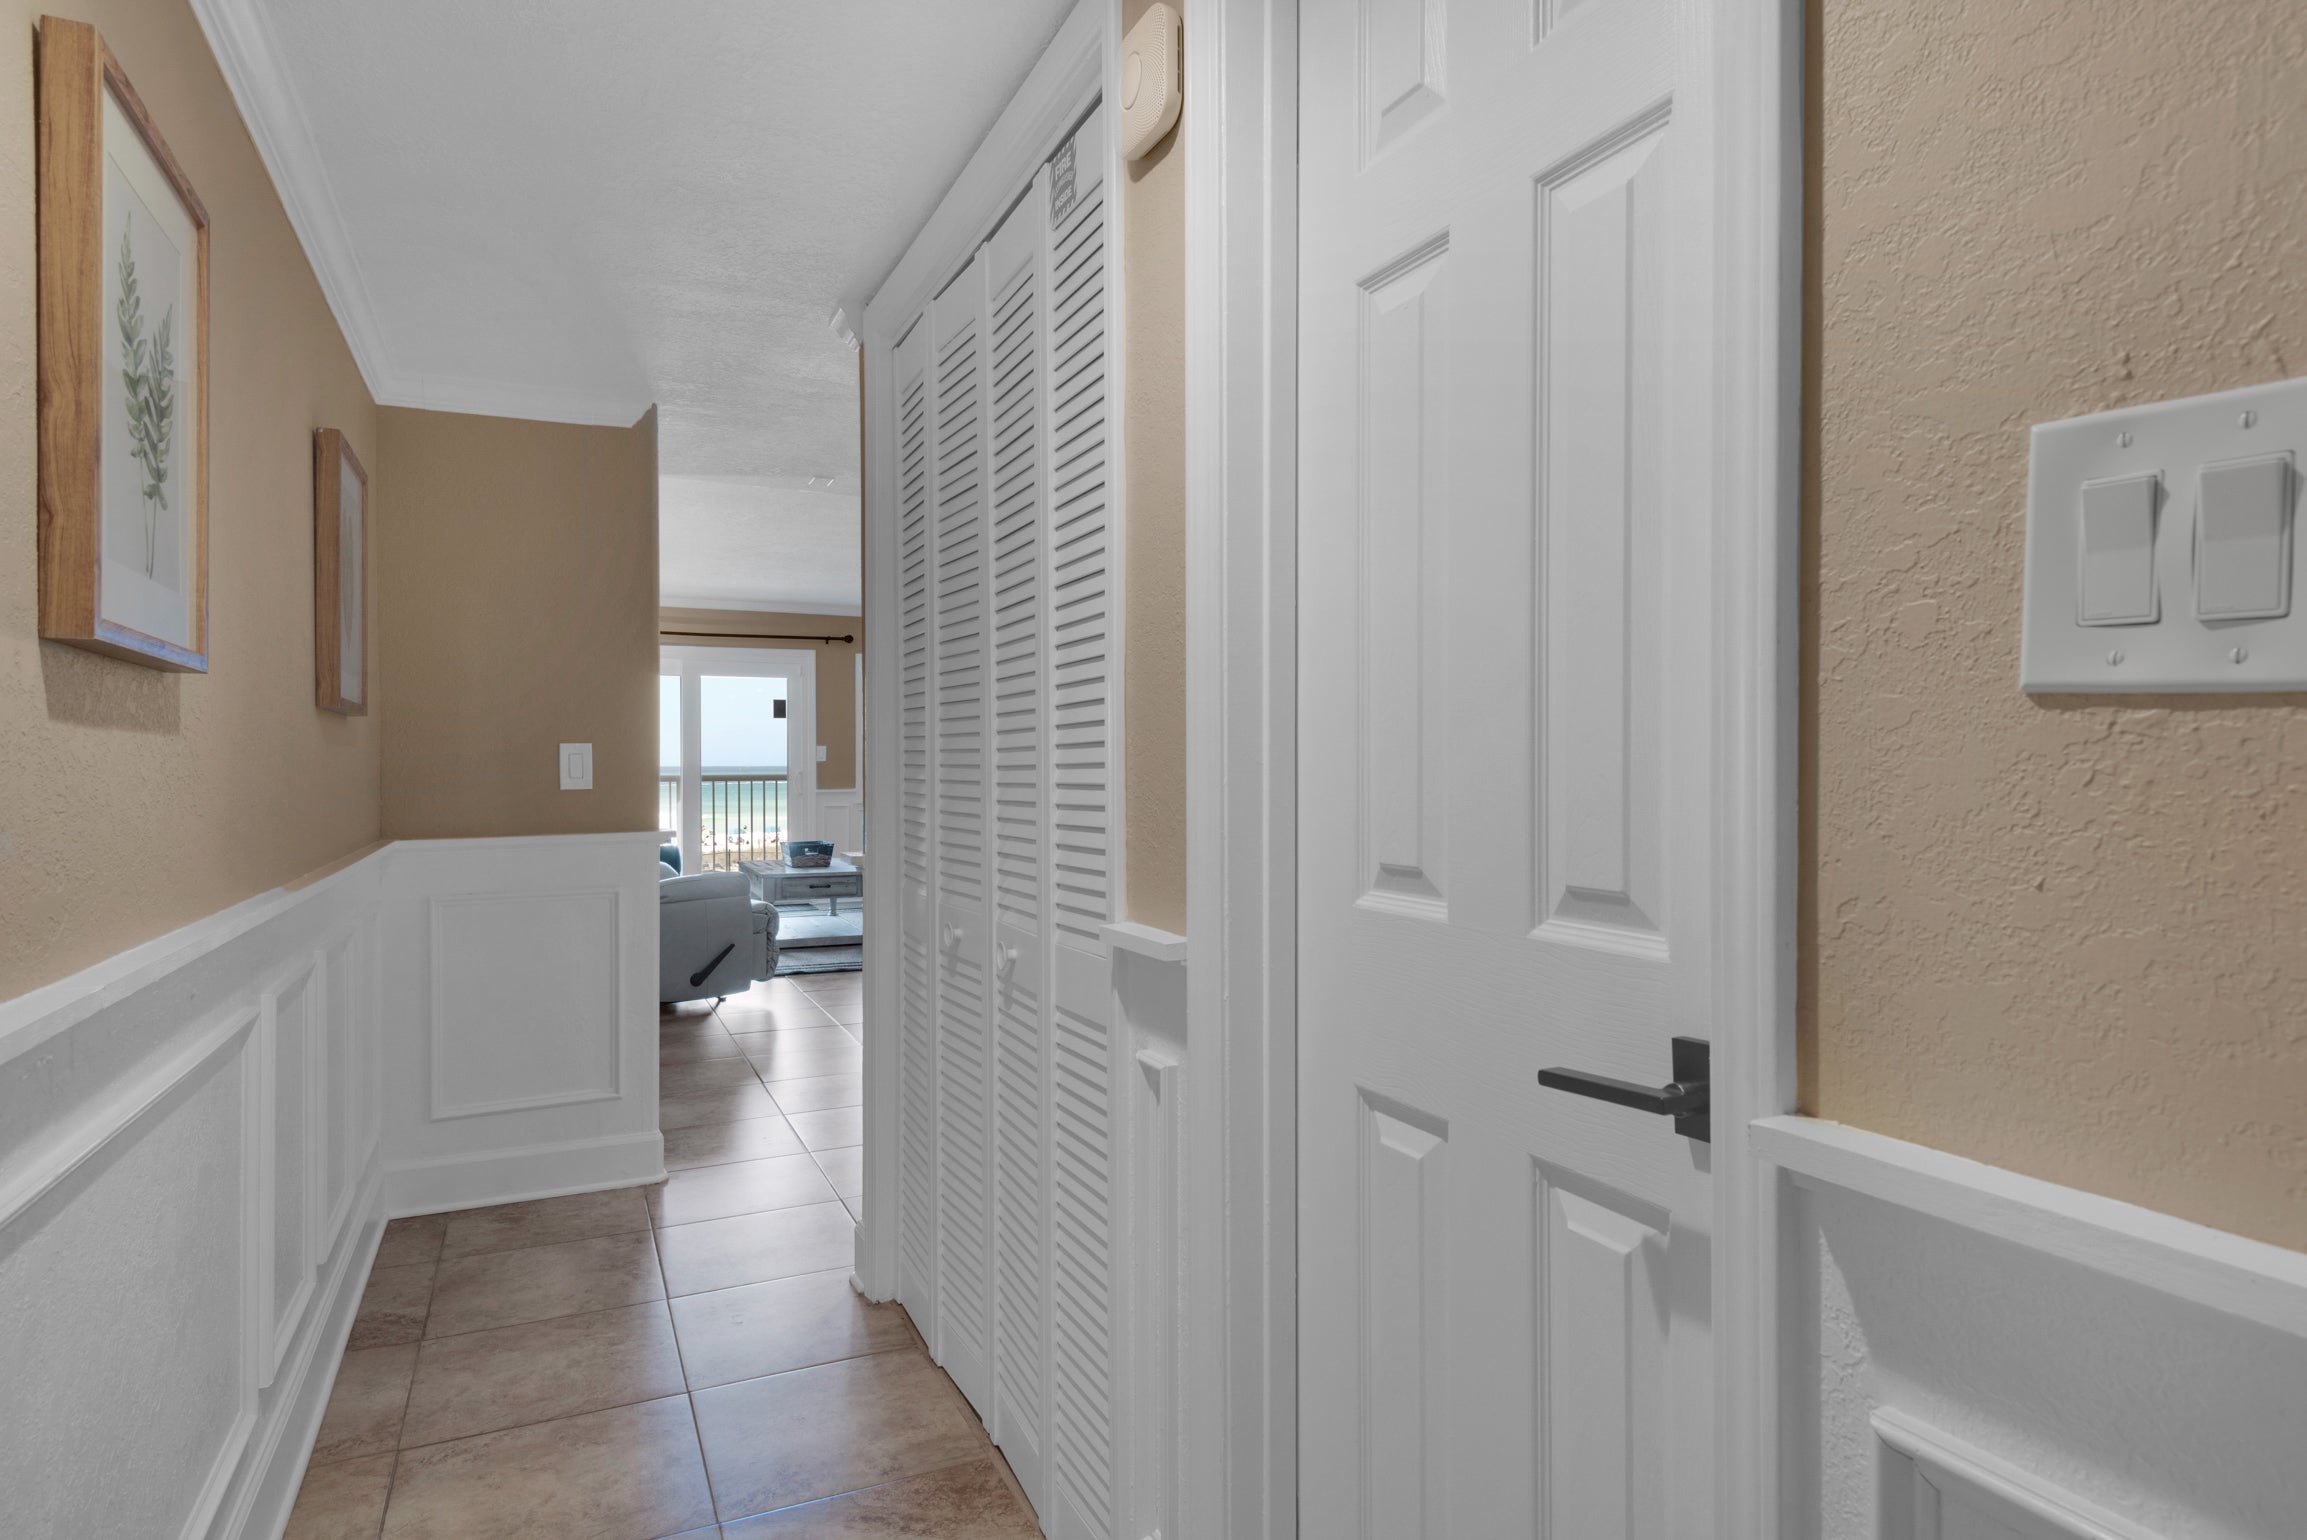 Entry with Beautiful Wainscoting